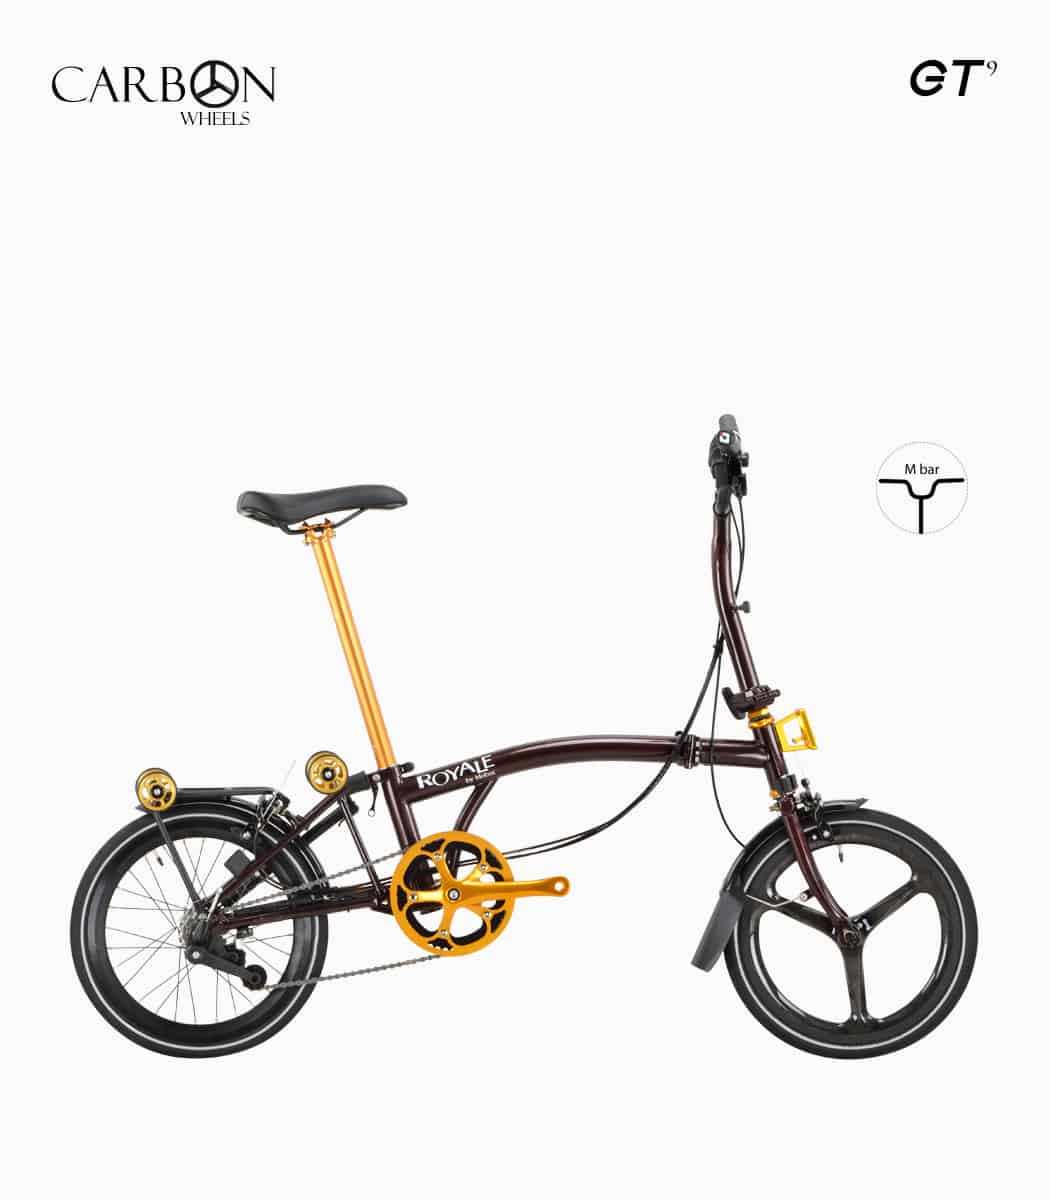 ROYALE CARBON GT M9 (BLACK CHERRY PEARL) foldable bicycle M bar with gold components right